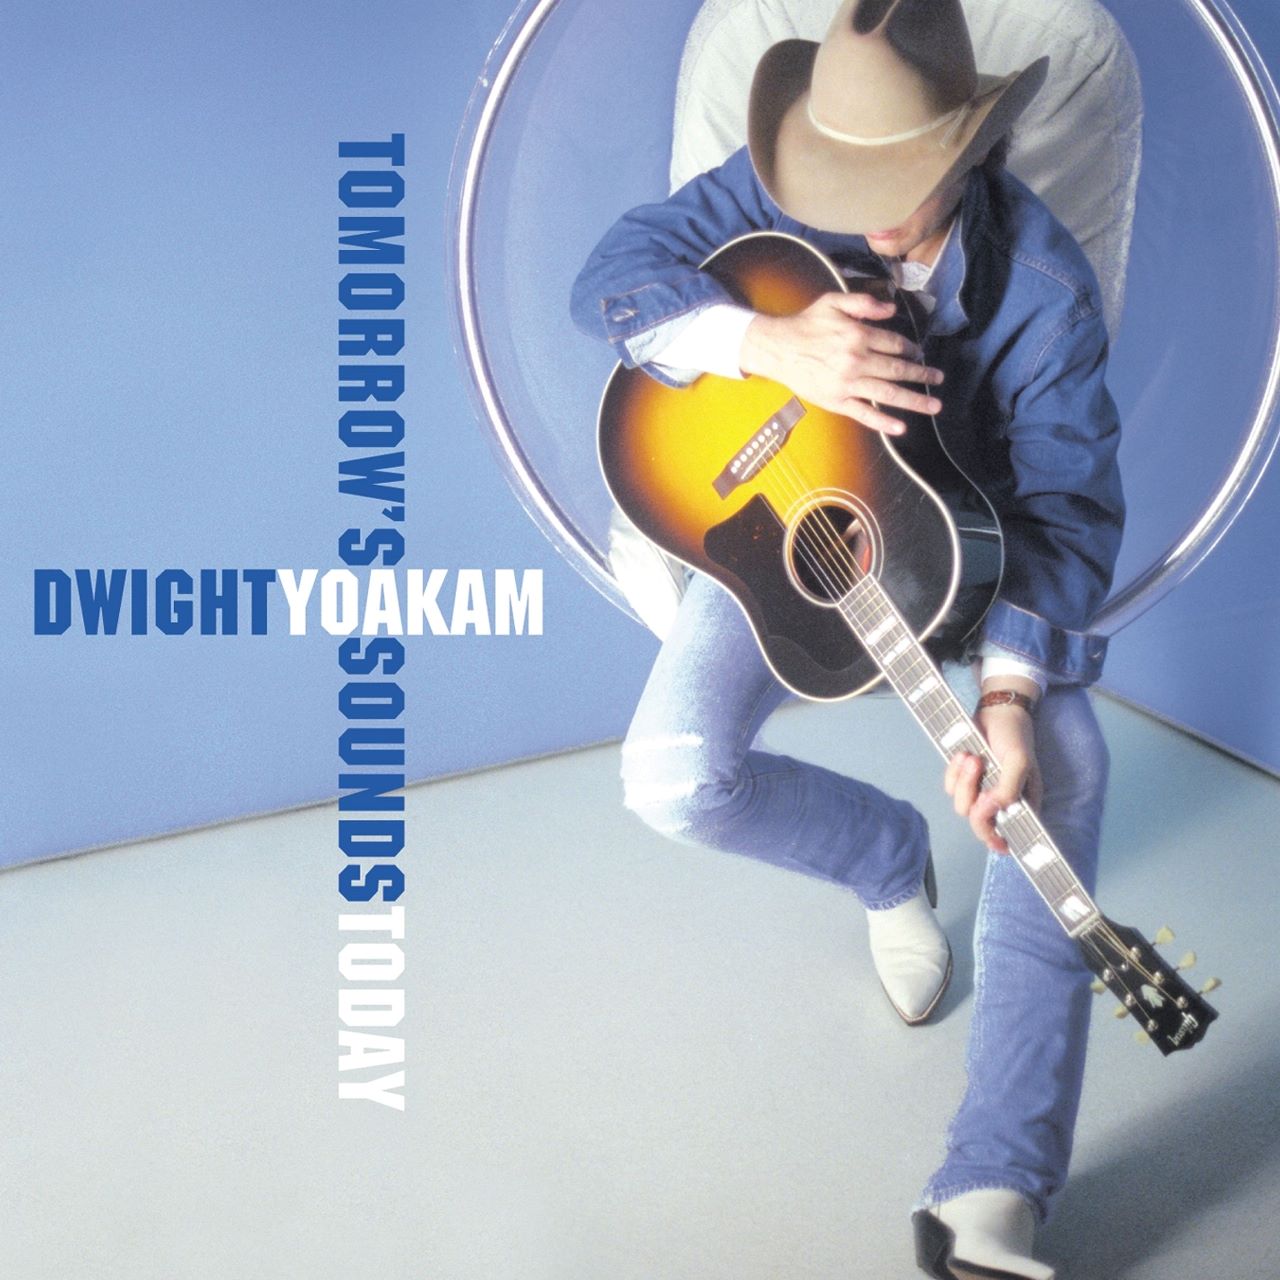 Dwight Yoakam – Tomorrow’s Sounds Today cover album